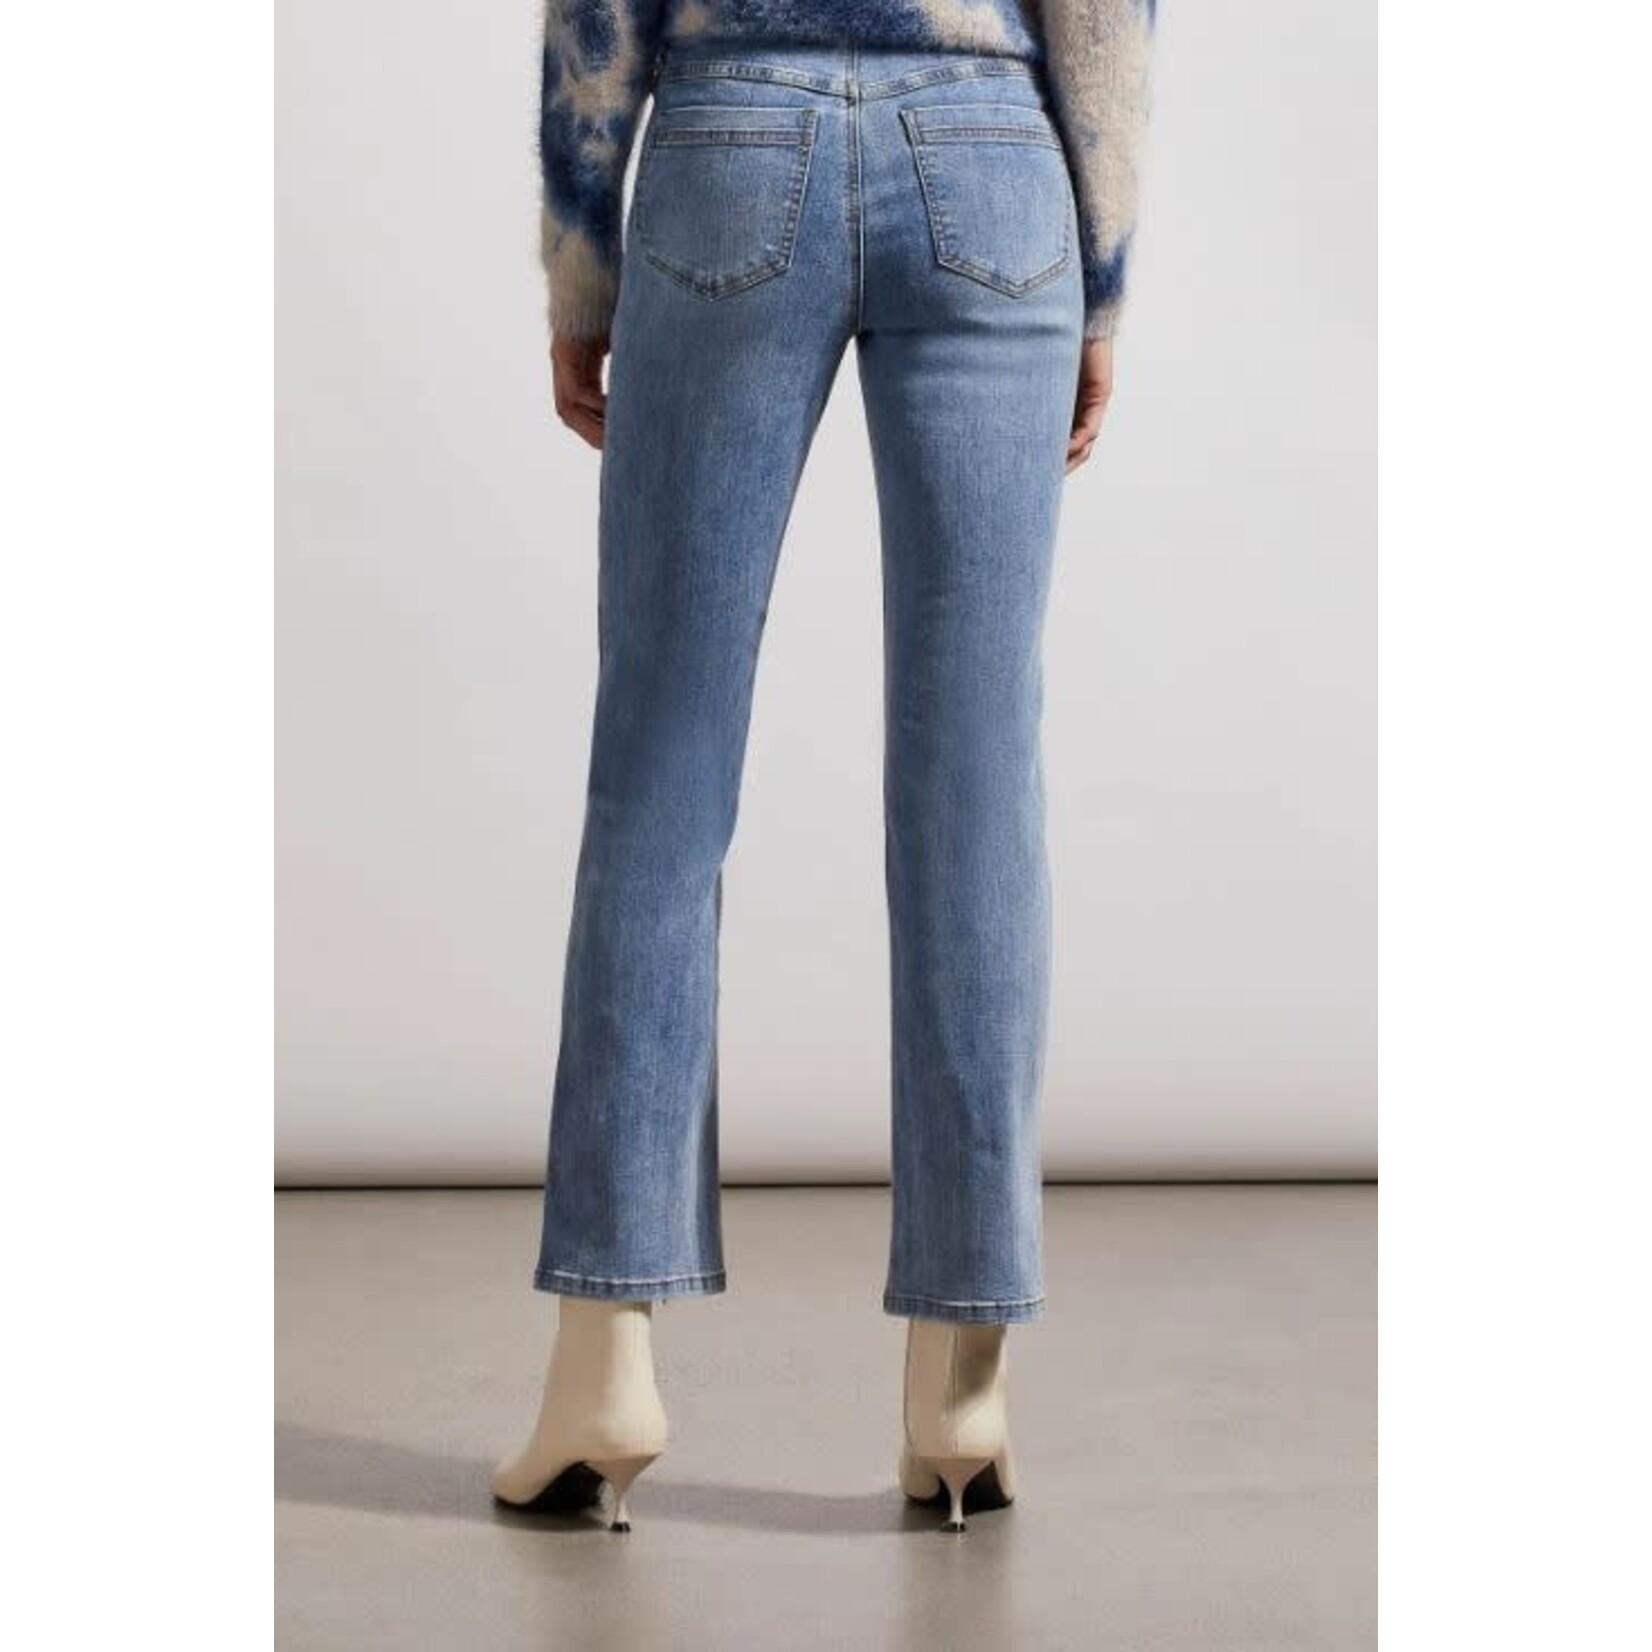 Tribal Audrey Pull On Microflare Jeans